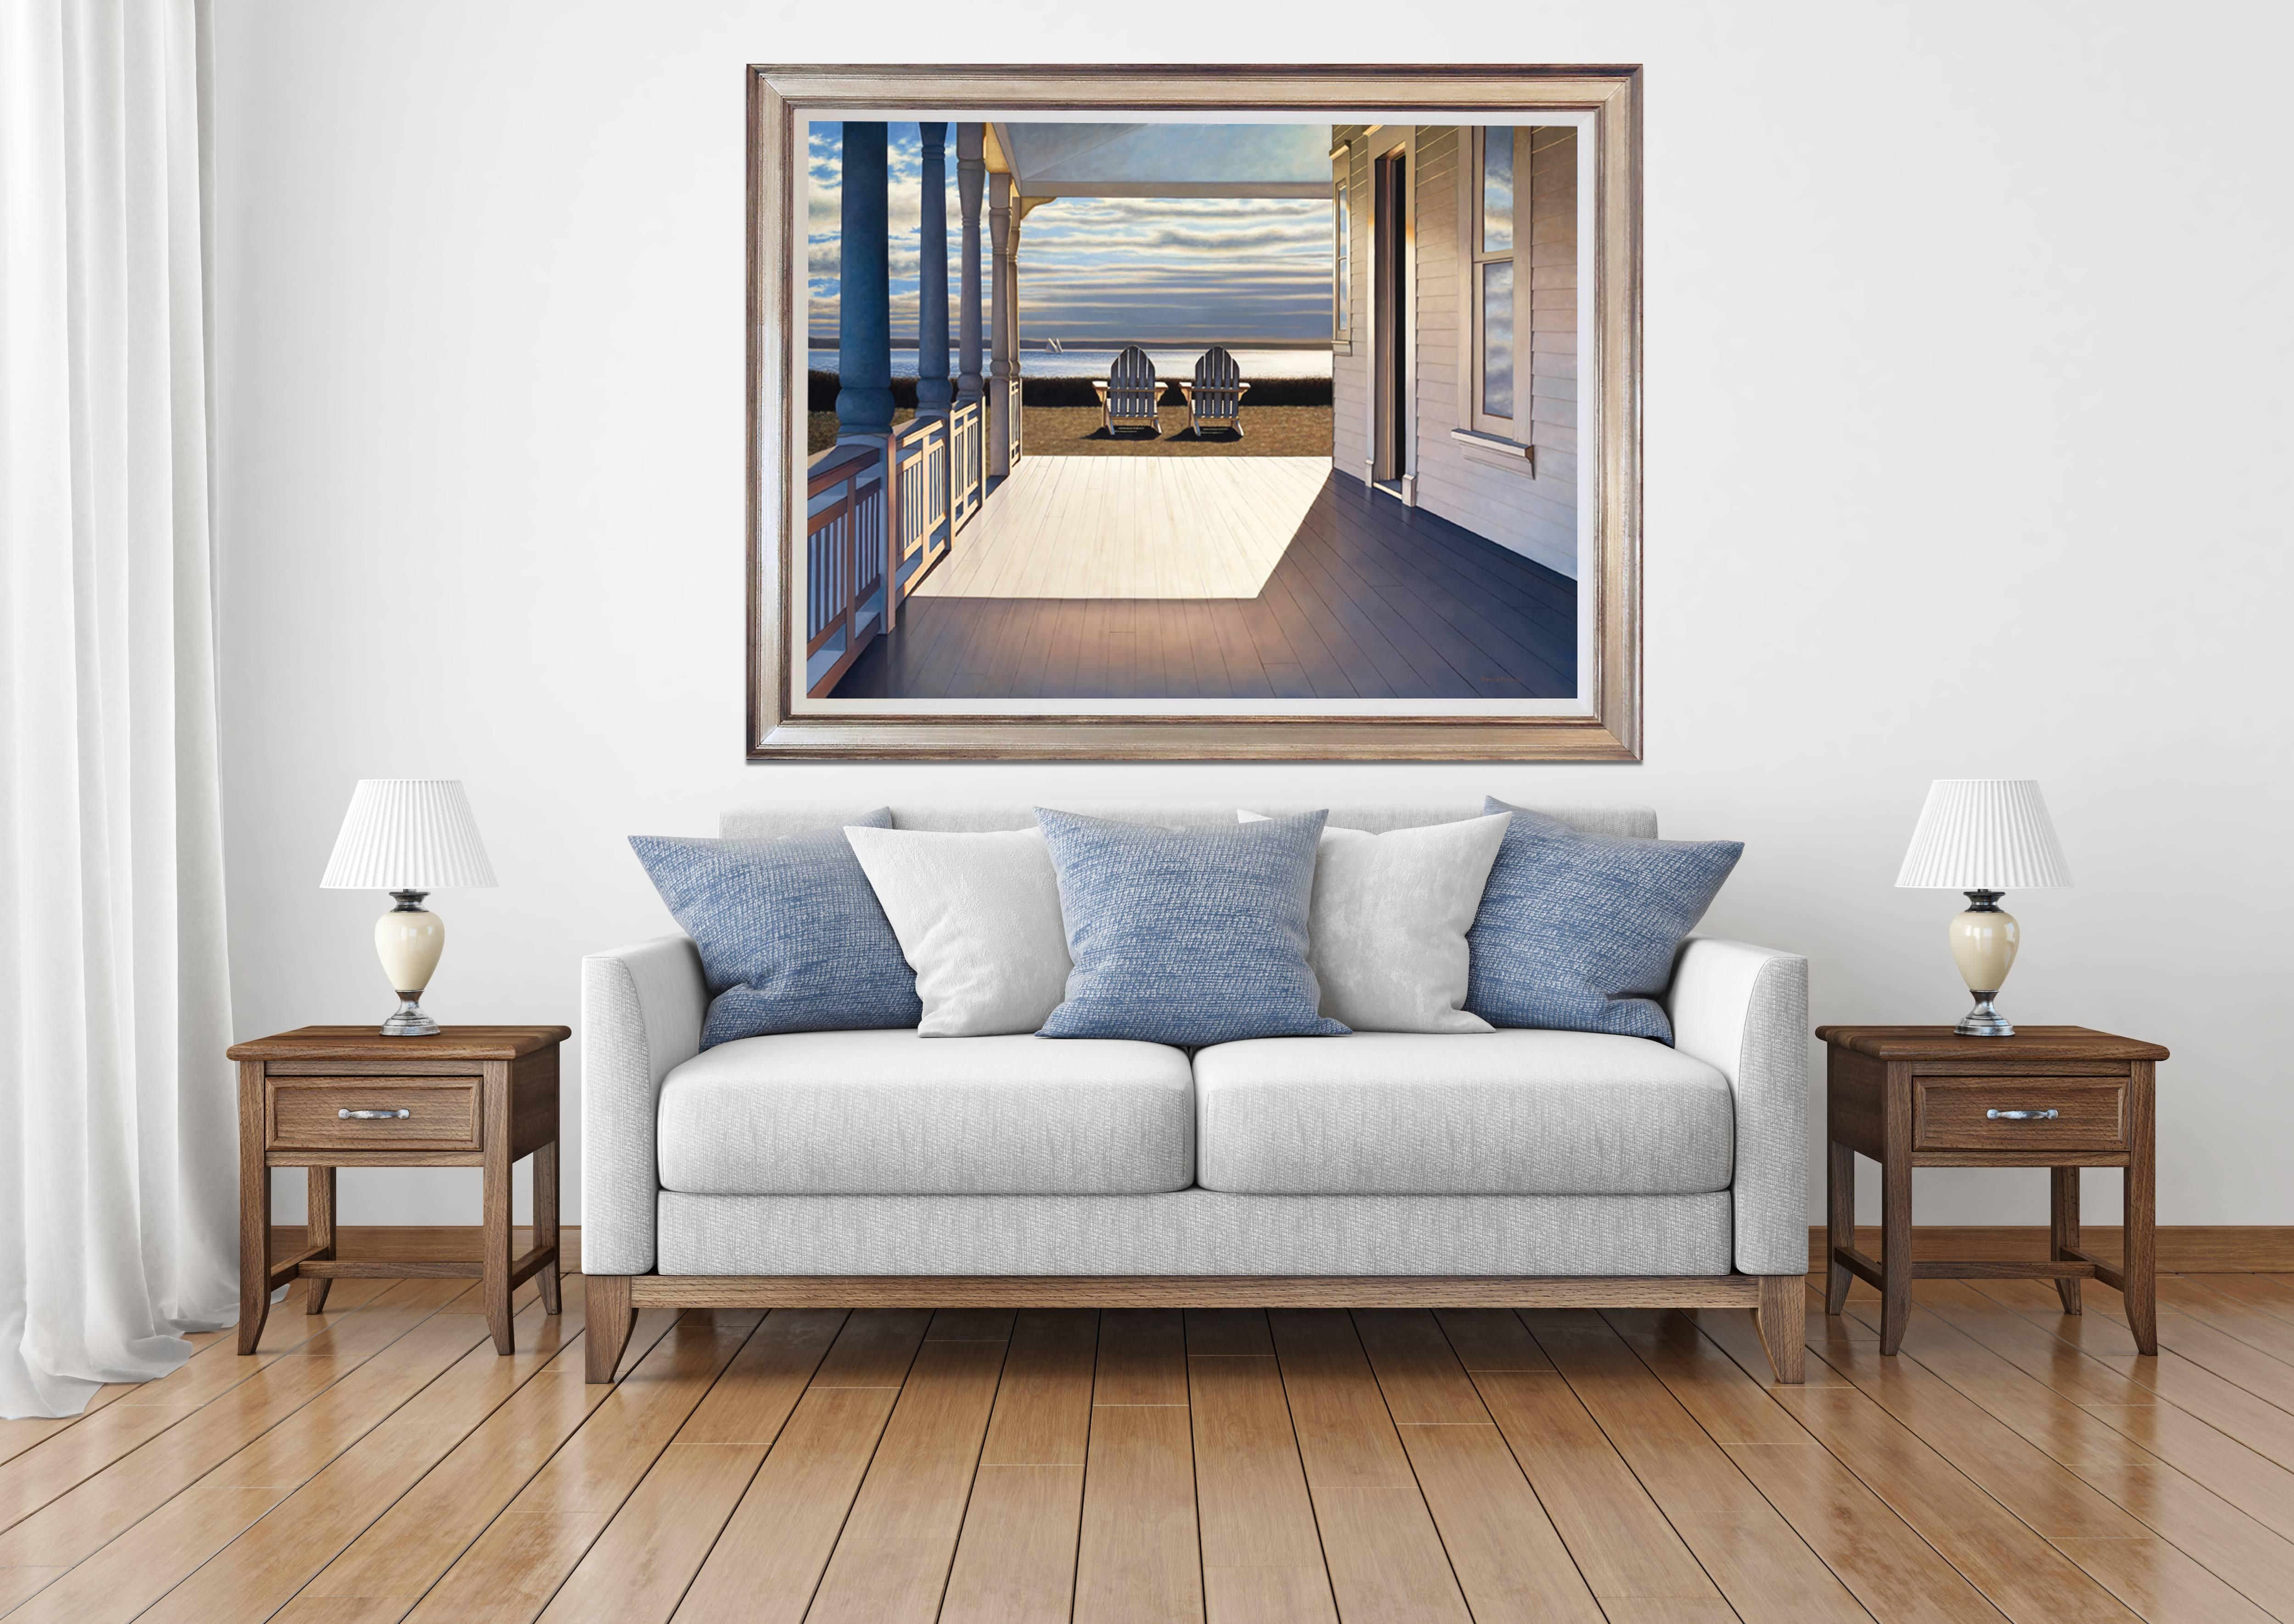 'Passing Time', Large Contemporary Realist Ocean Marine Oil Painting 2